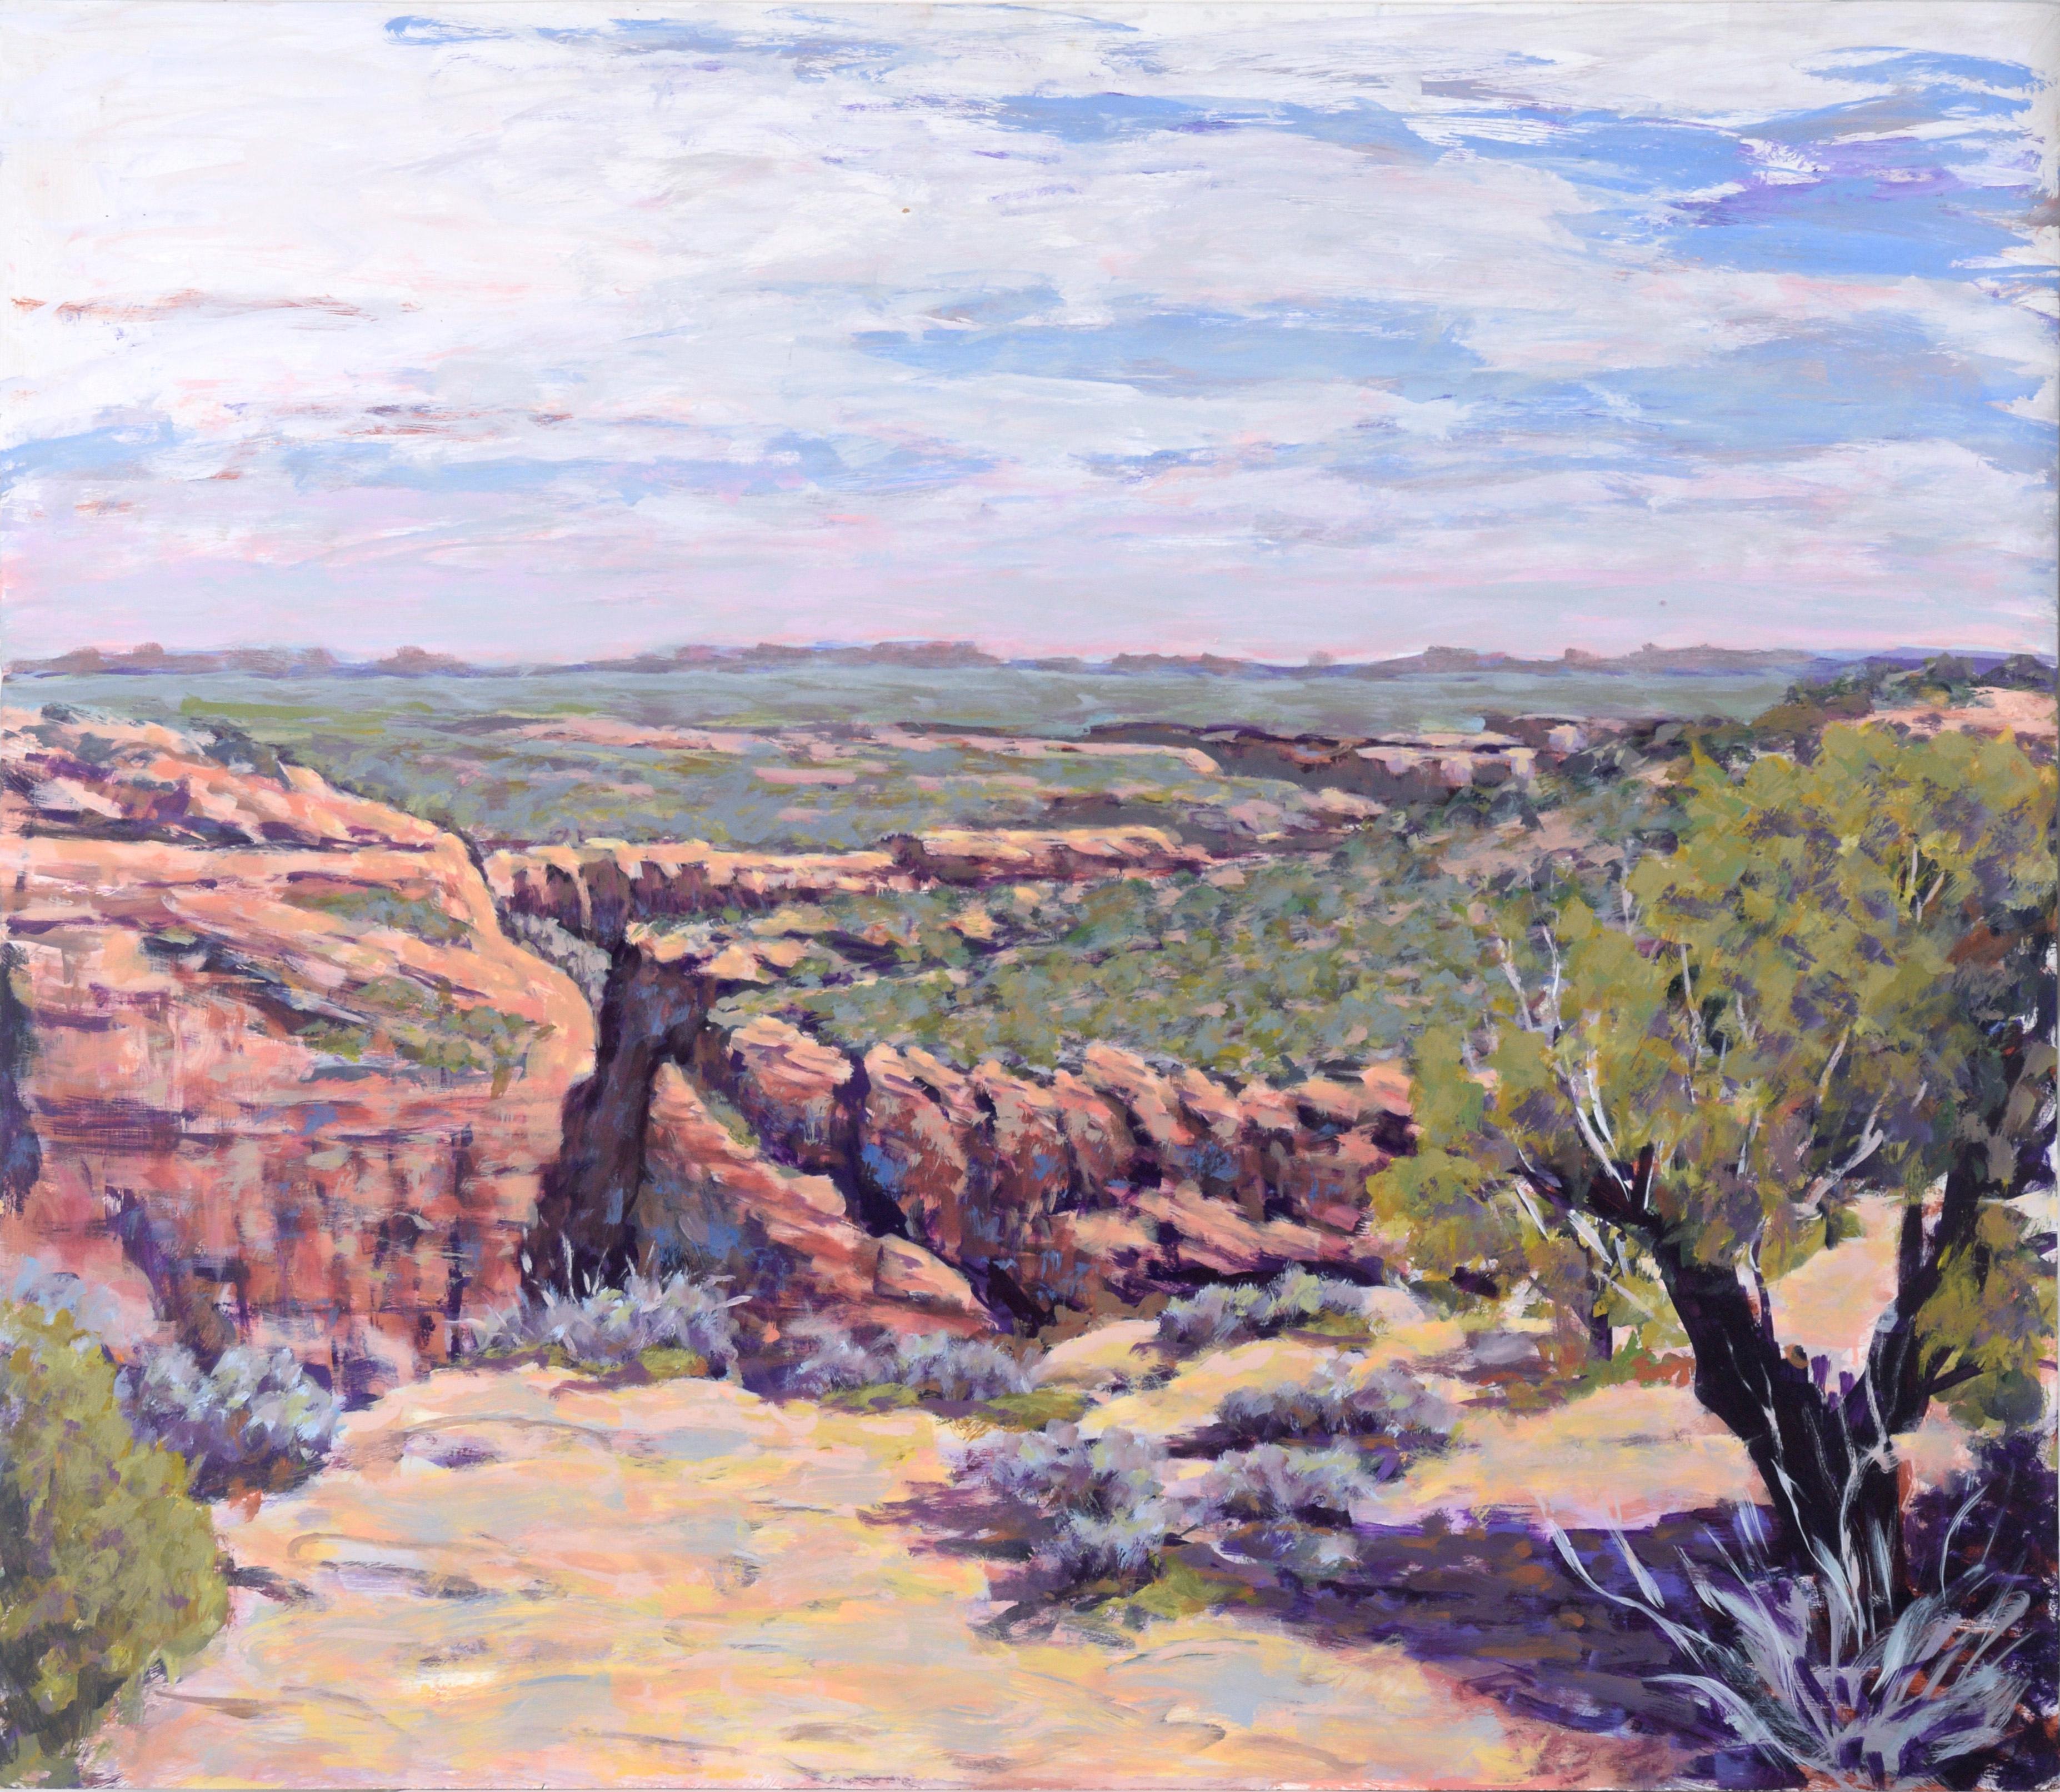 Nick White Landscape Painting - Looking Out Over the Canyons - Western Plein Aire Landscape in Acrylic on Board